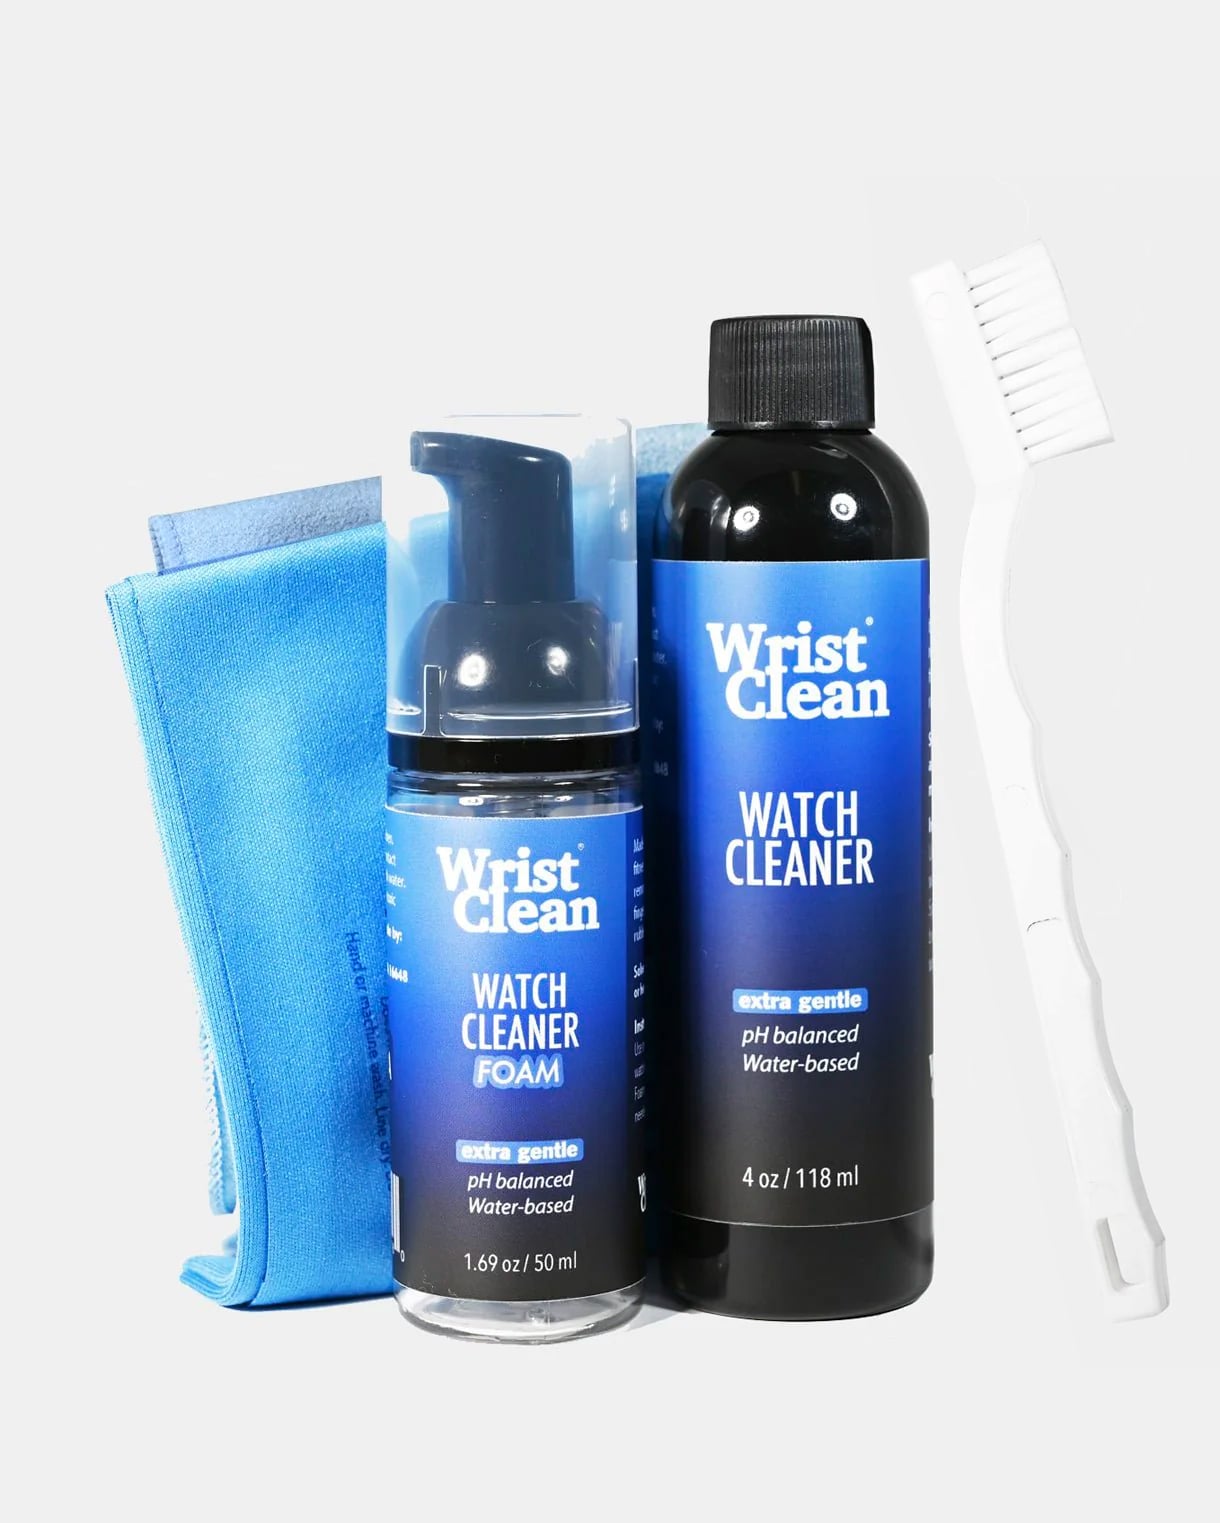 Top Watch Cleaning Kits for Every Watch Enthusiast – WristClean